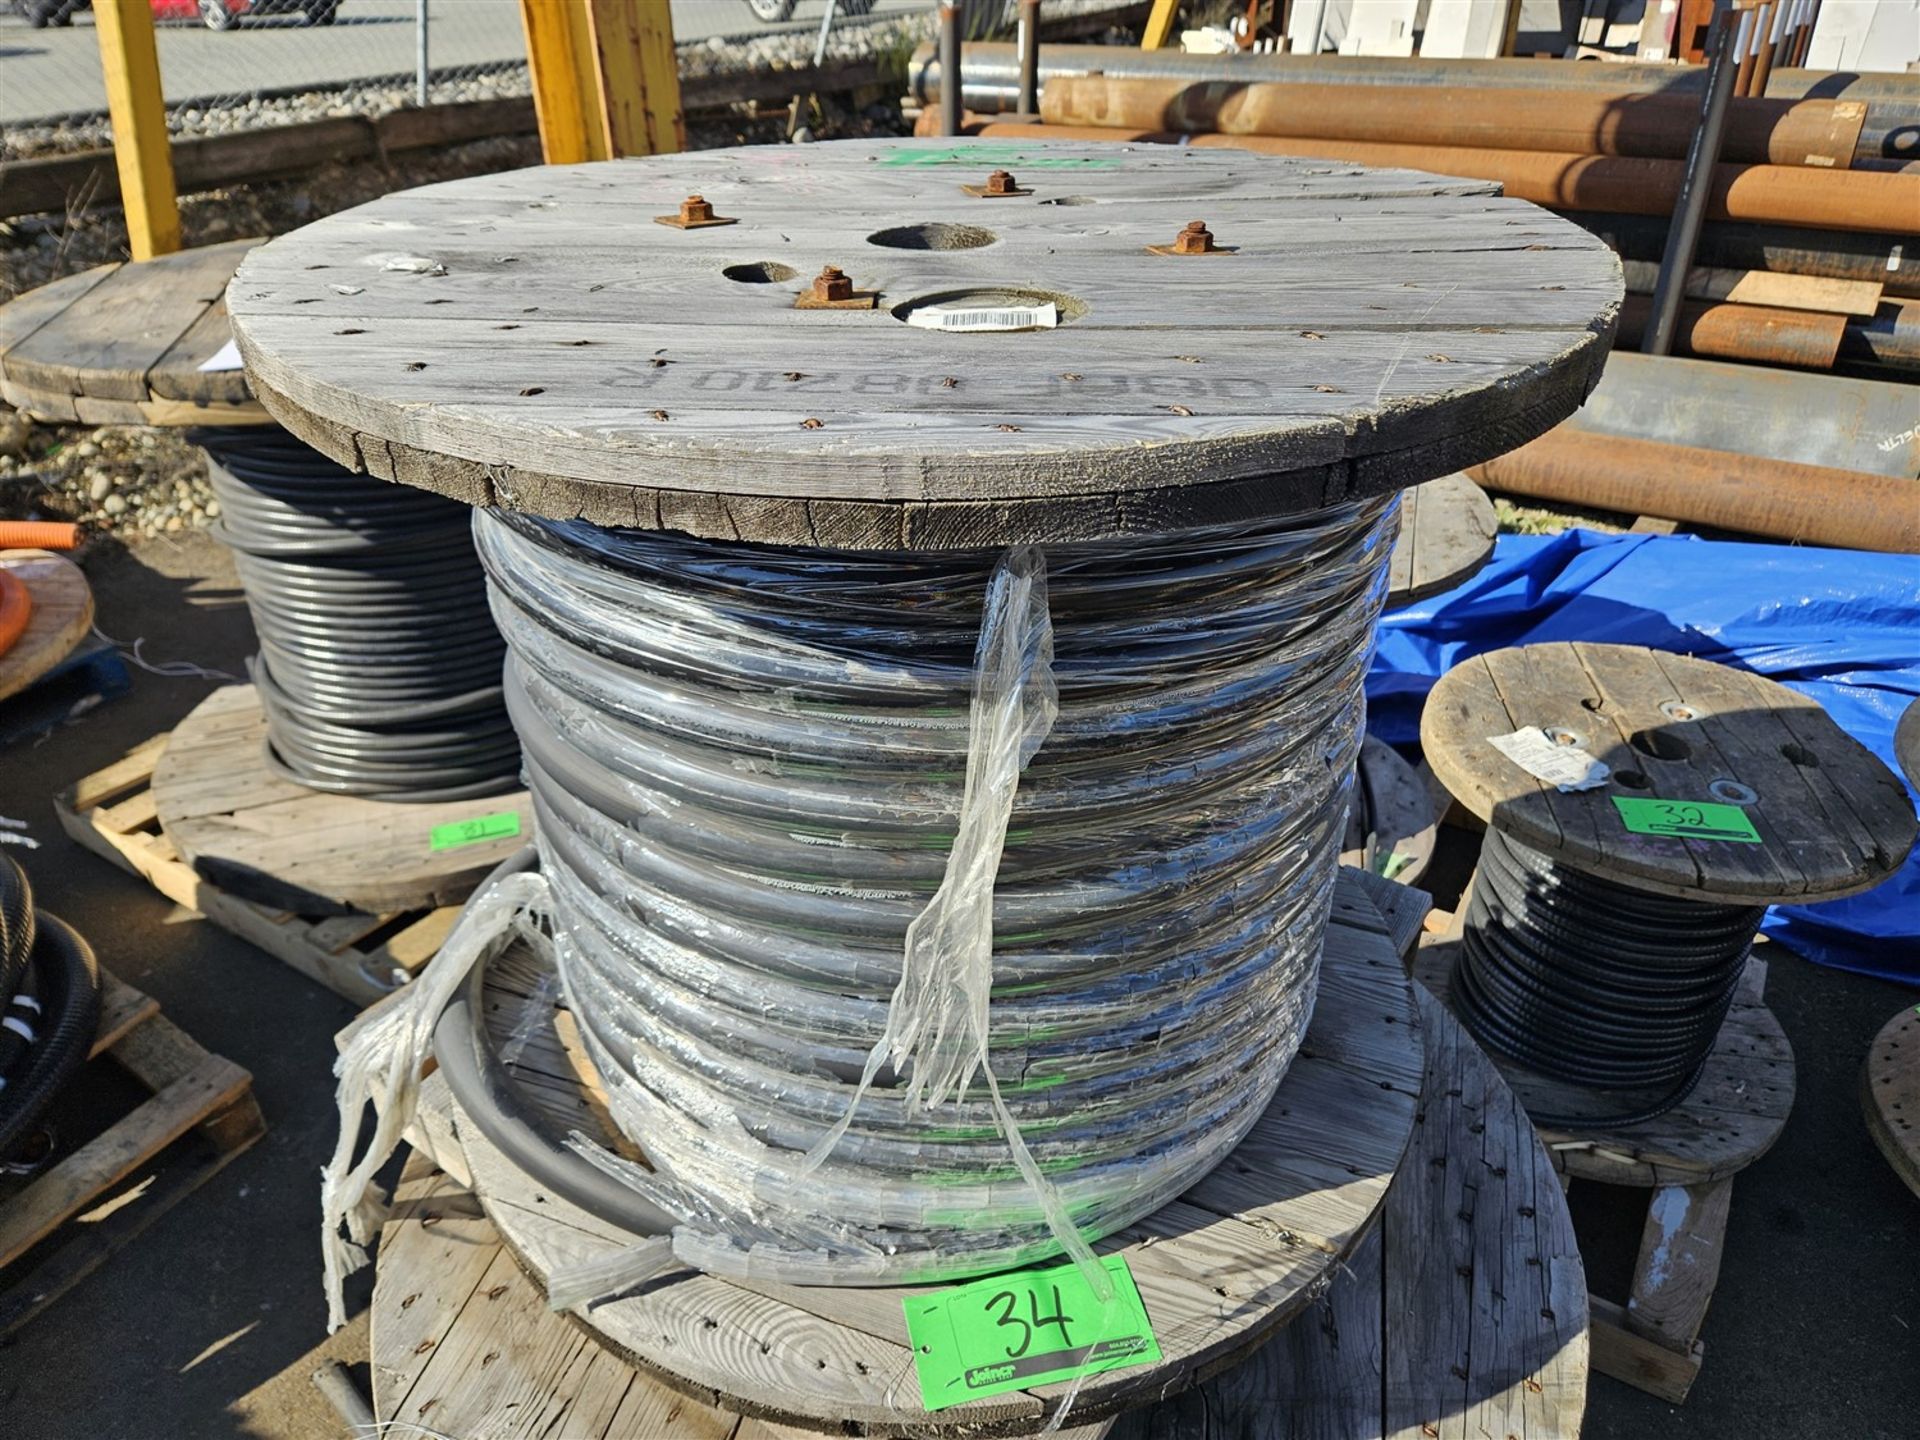 REEL OF TF CABLE 923 MCM APPROX. 130 FT. - COPPER